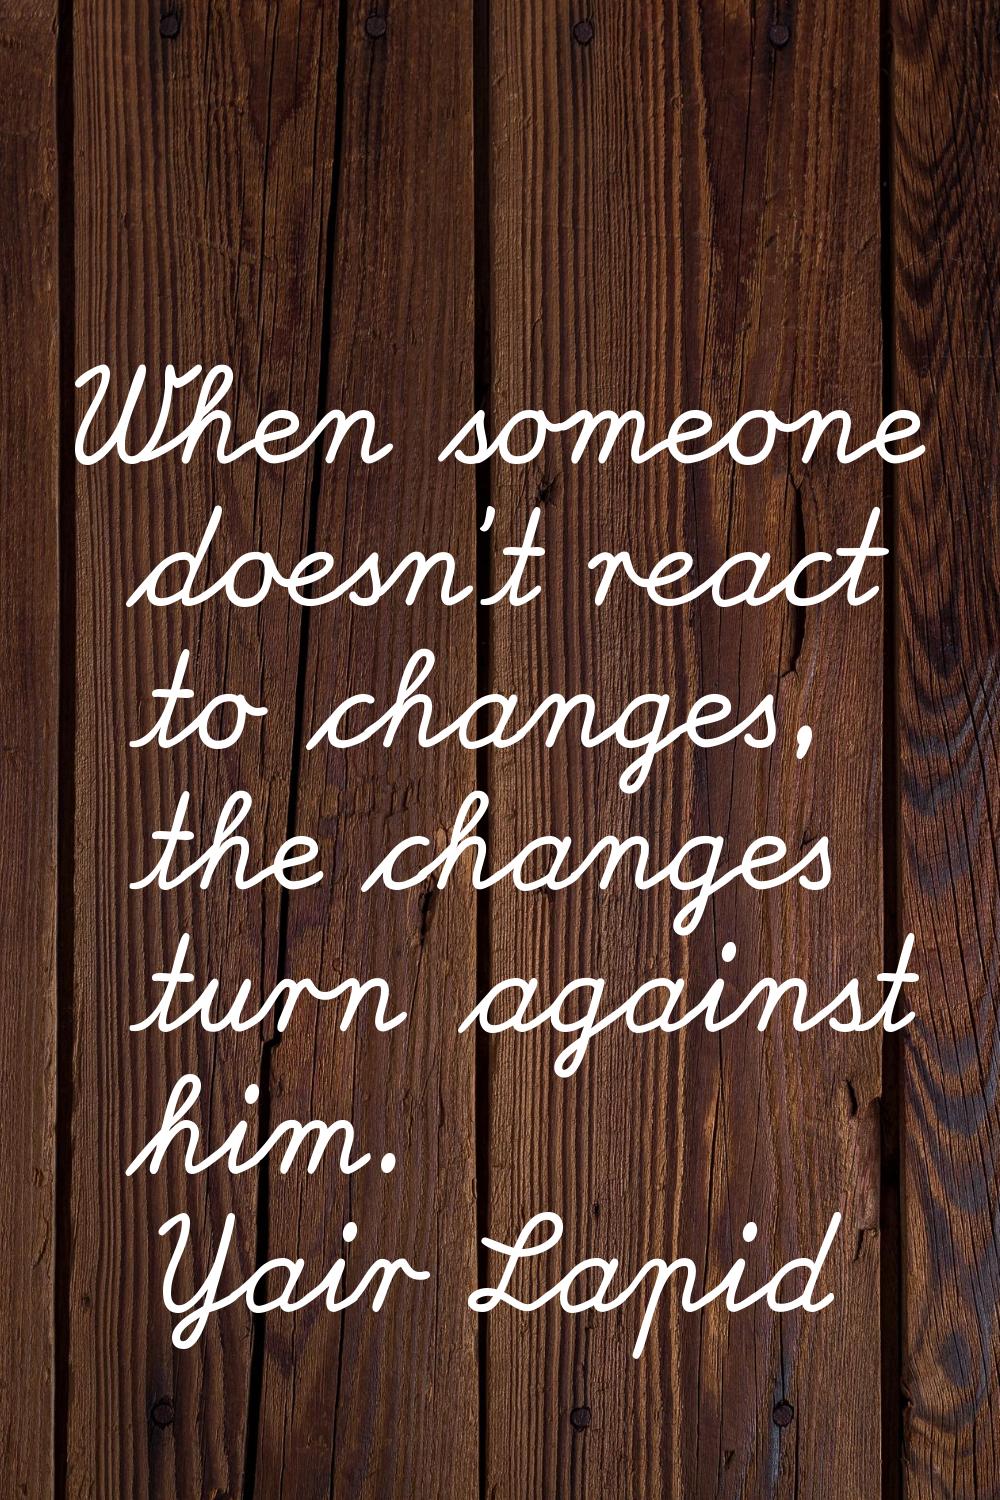 When someone doesn't react to changes, the changes turn against him.